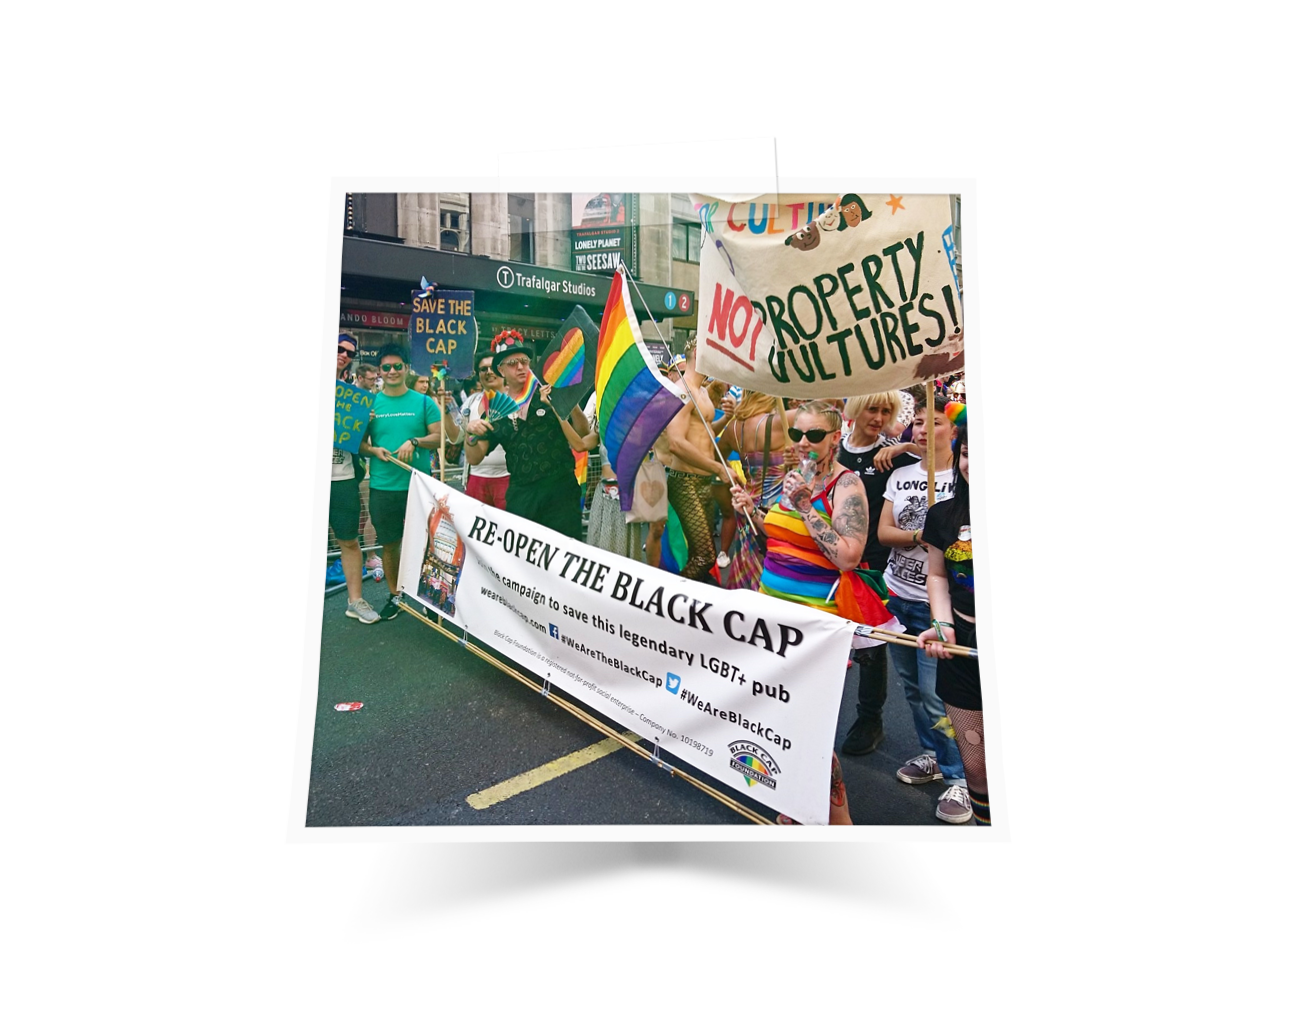 A group of people walking in the Pride March waving pride flags supporting the reopening of the Black Cap